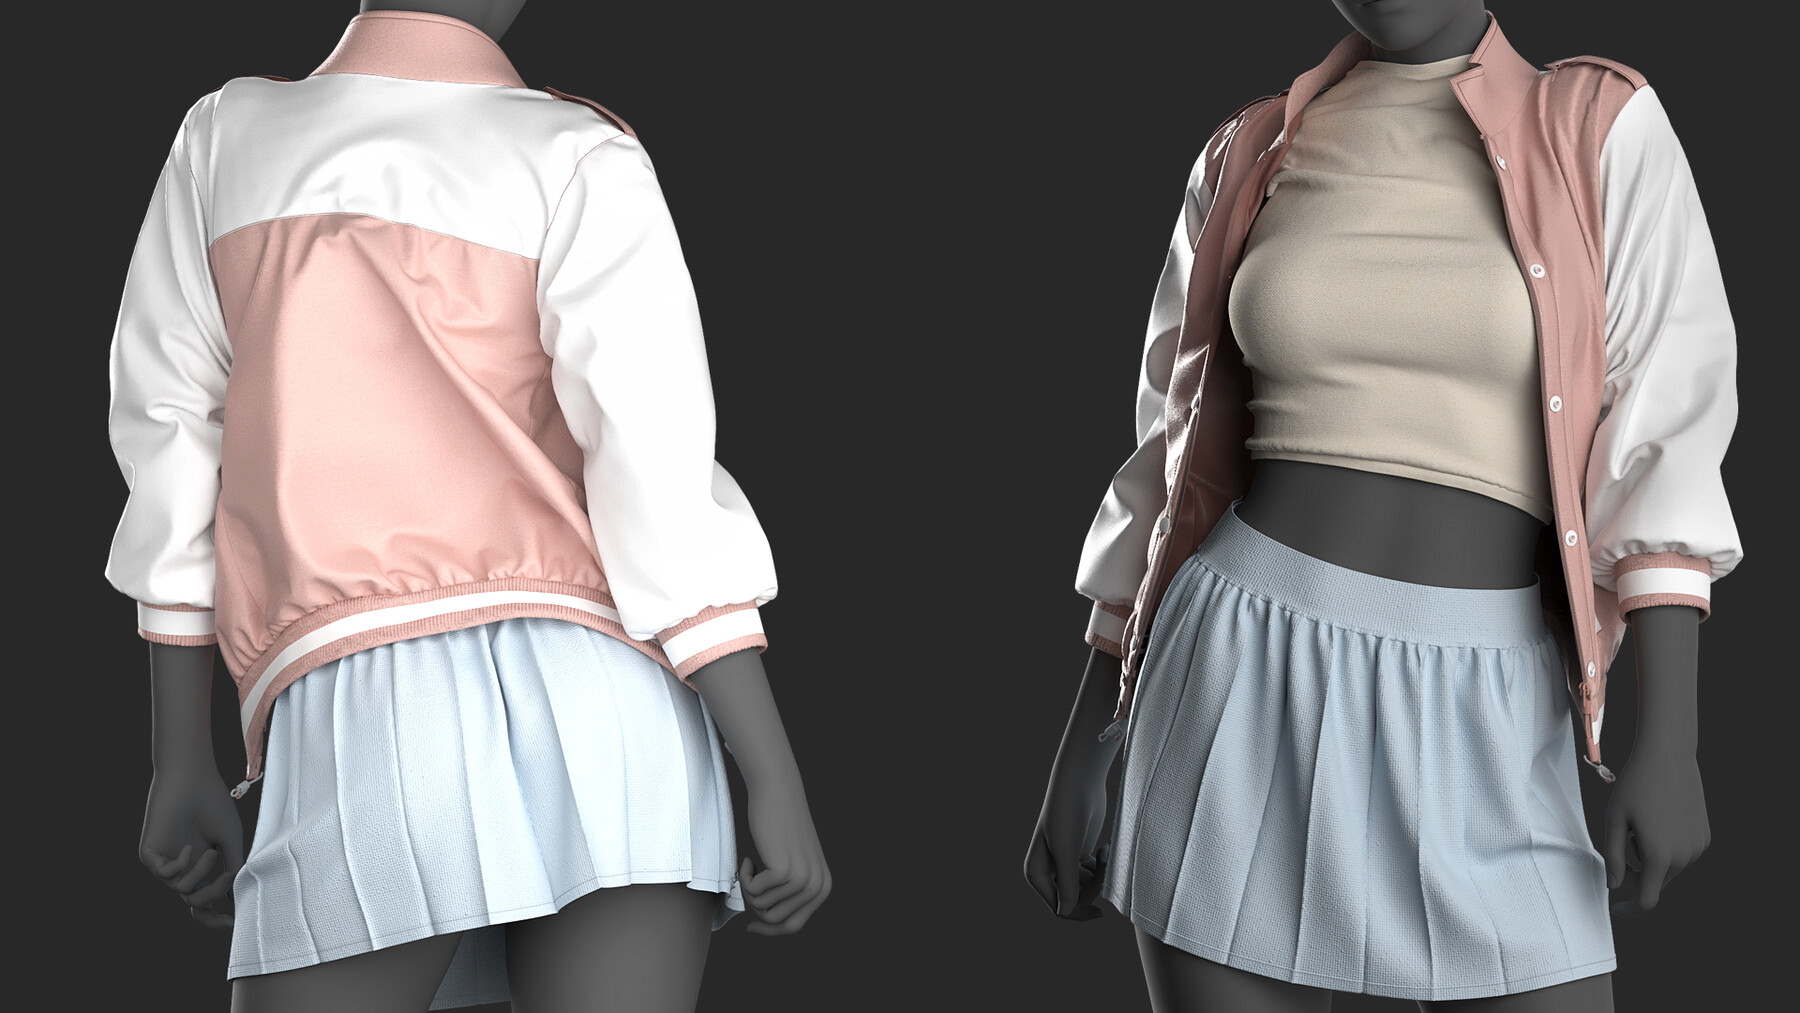 ArtStation - Girl's Outfit 3 - Marvelous / CLO Project file +Video ...